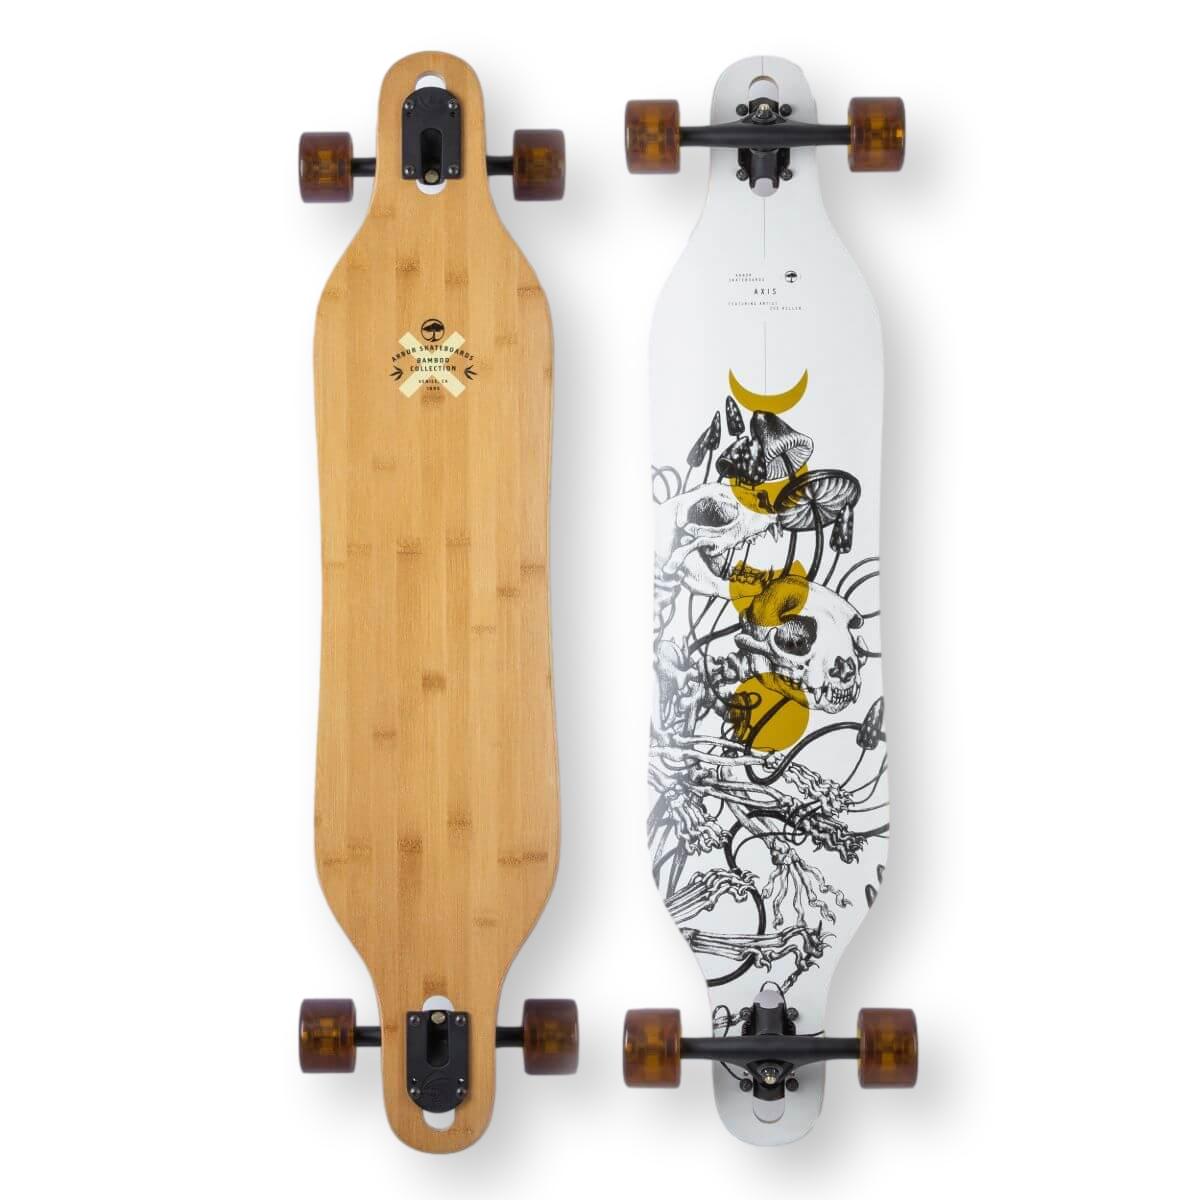 Arbor Axis 40 Bamboo Longboard, Complete